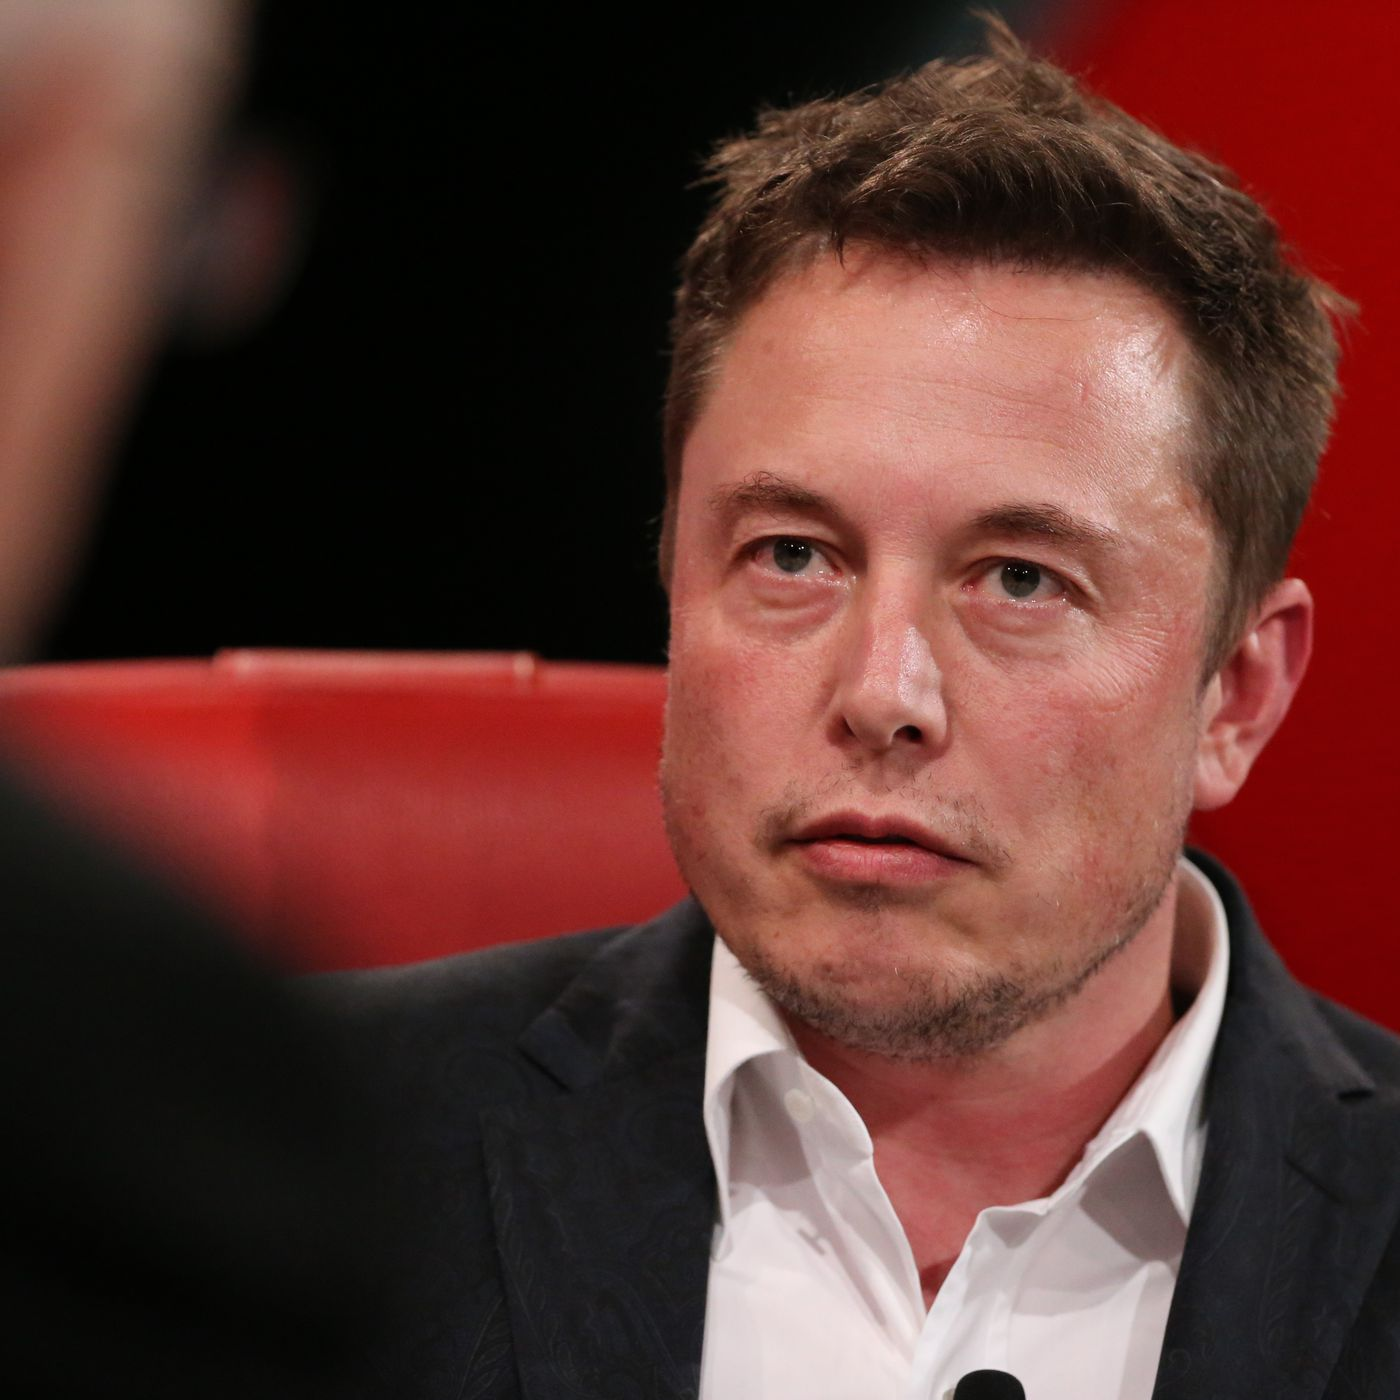 Elon Musk sent warning message to Twitter CEO Parag Agrawal